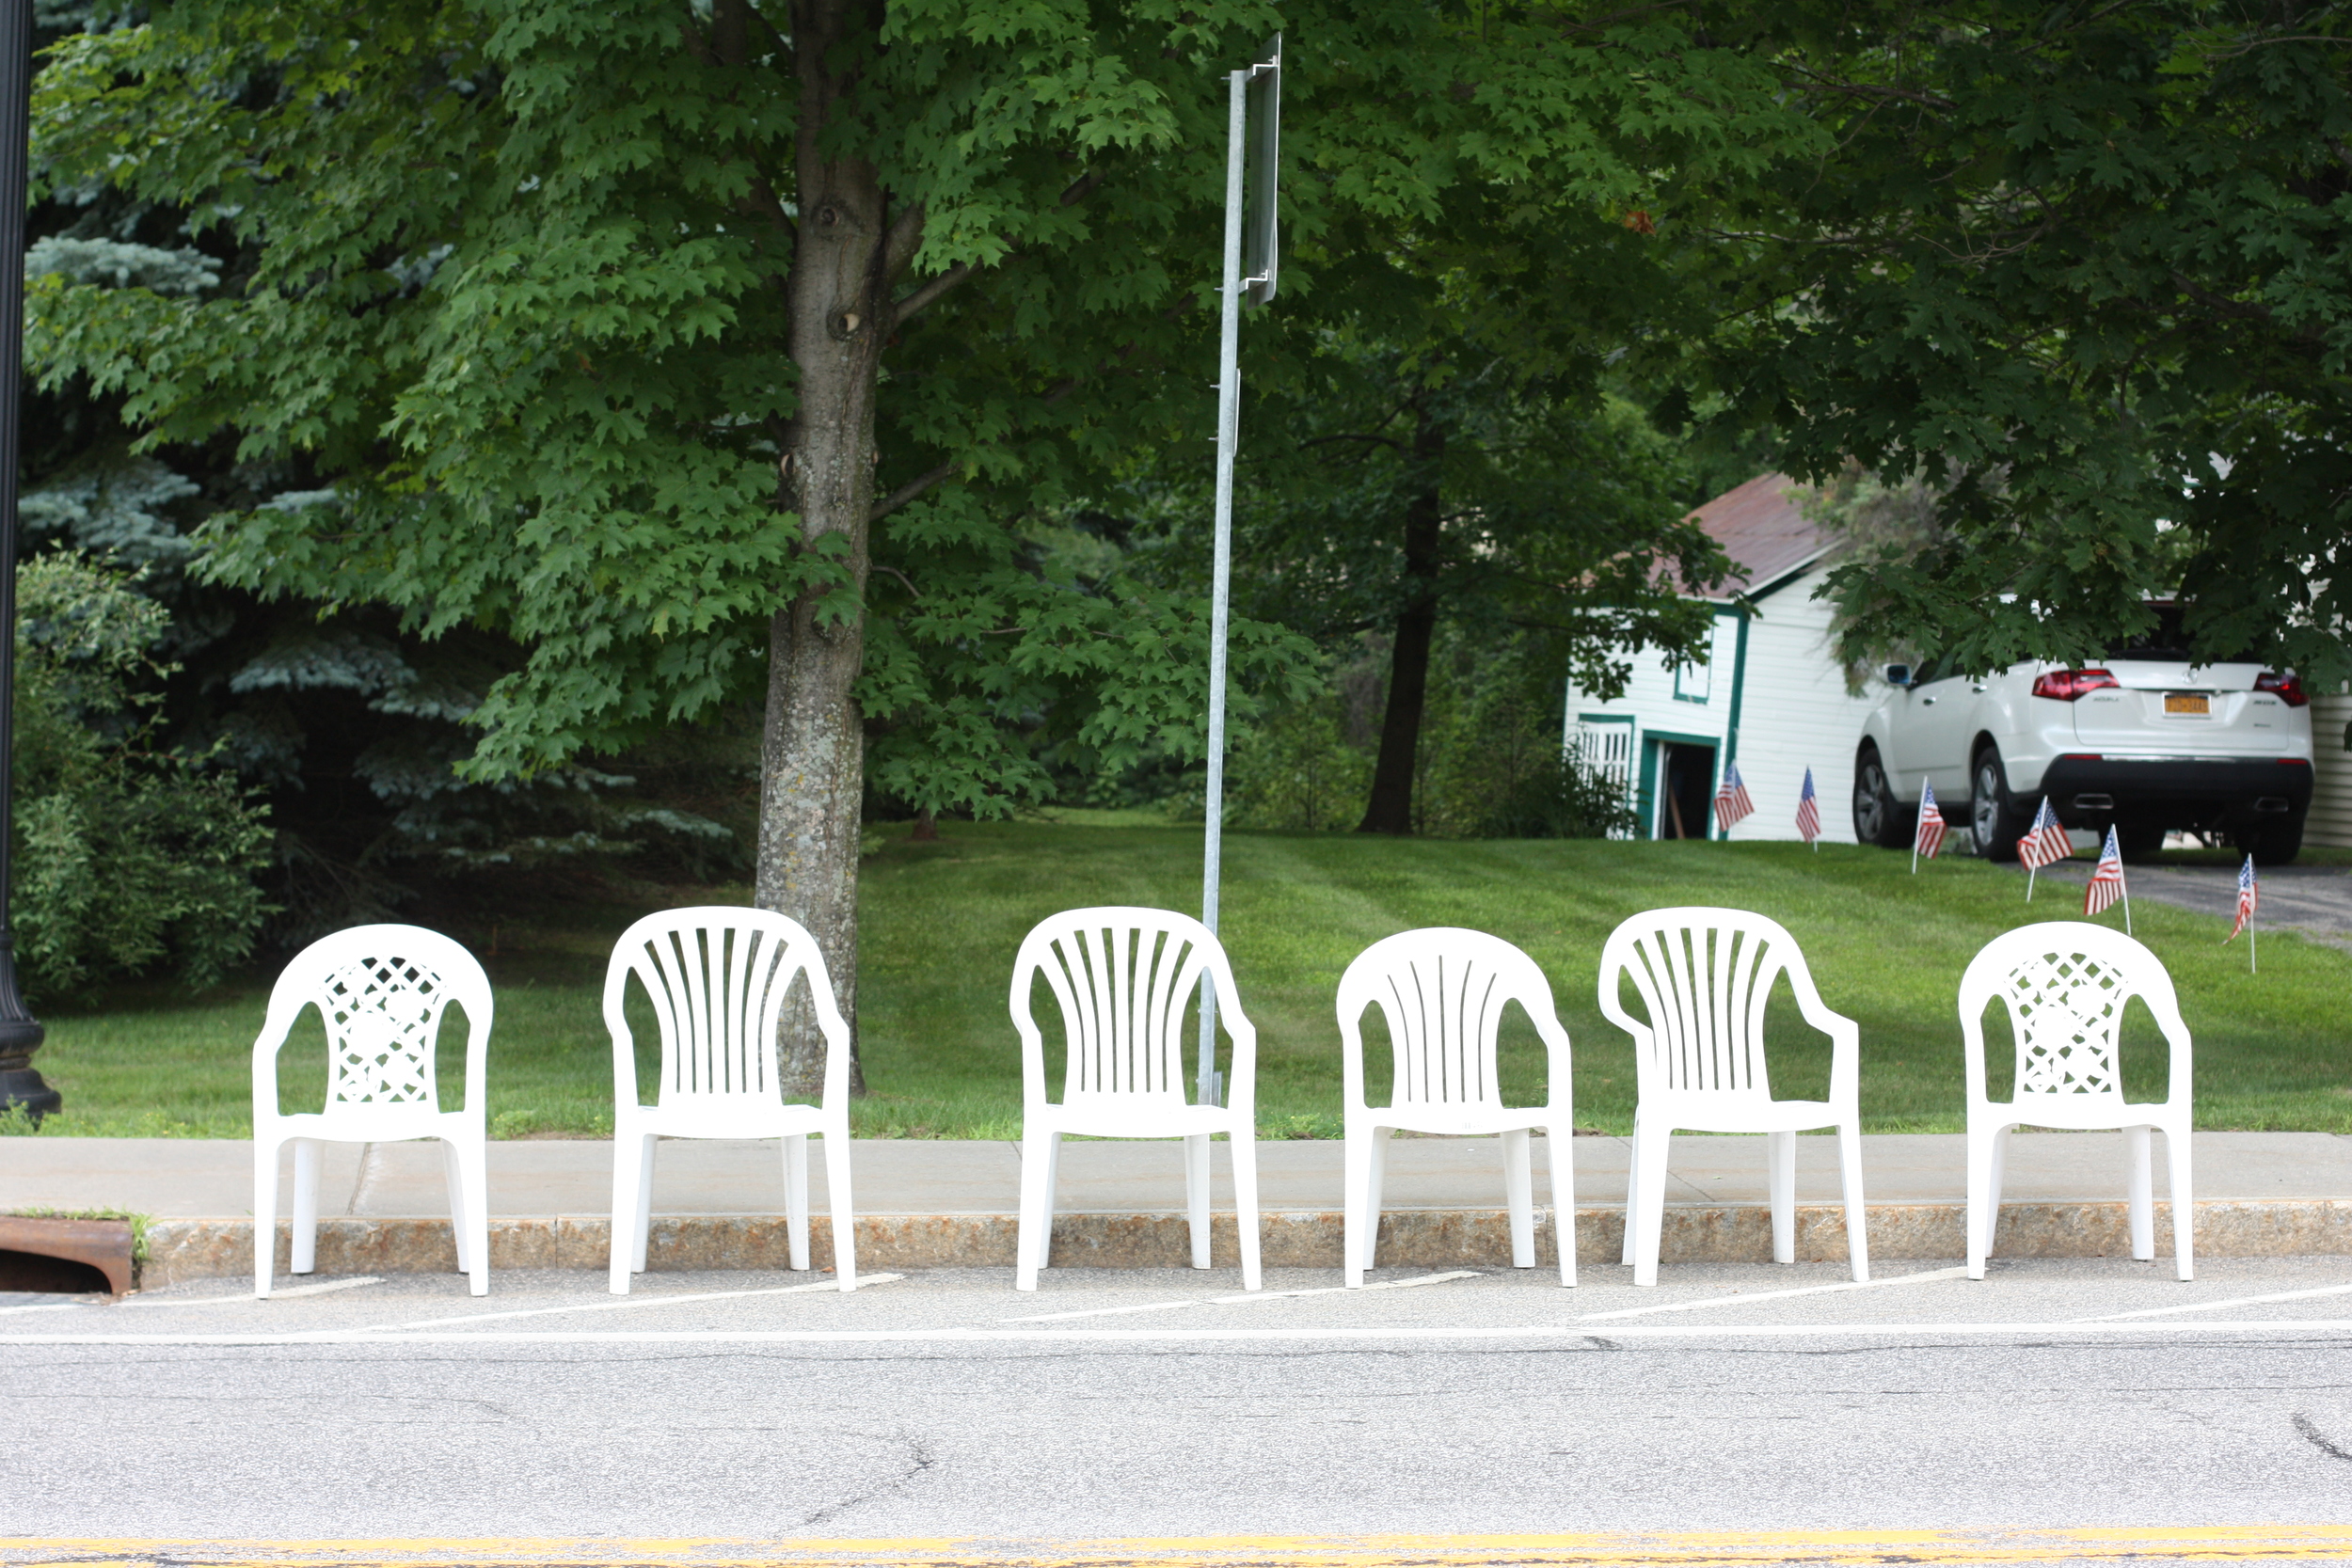 Folks reserving their "Hollywood" seating for the Schroon Lake July 4th Parade!